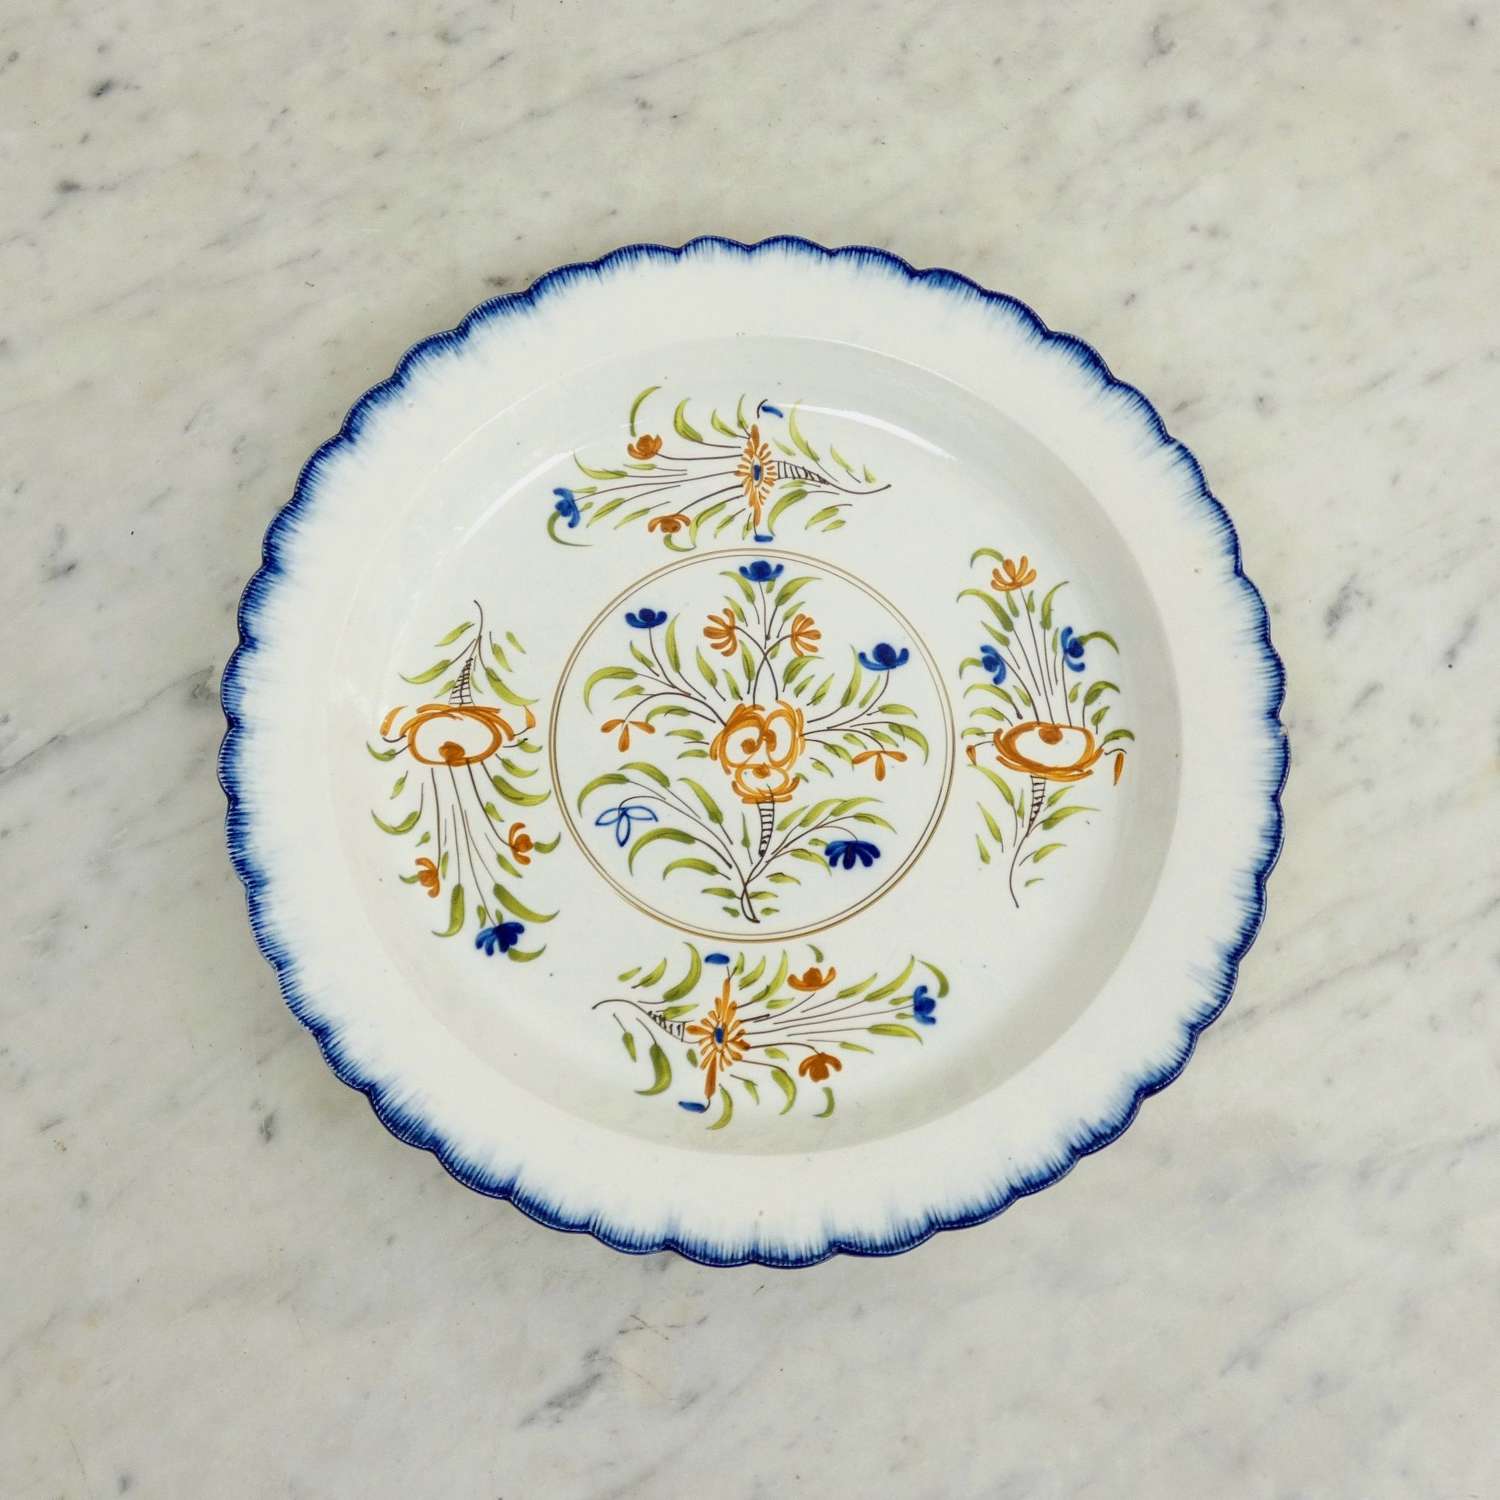 Colourful, Pearlware Platter